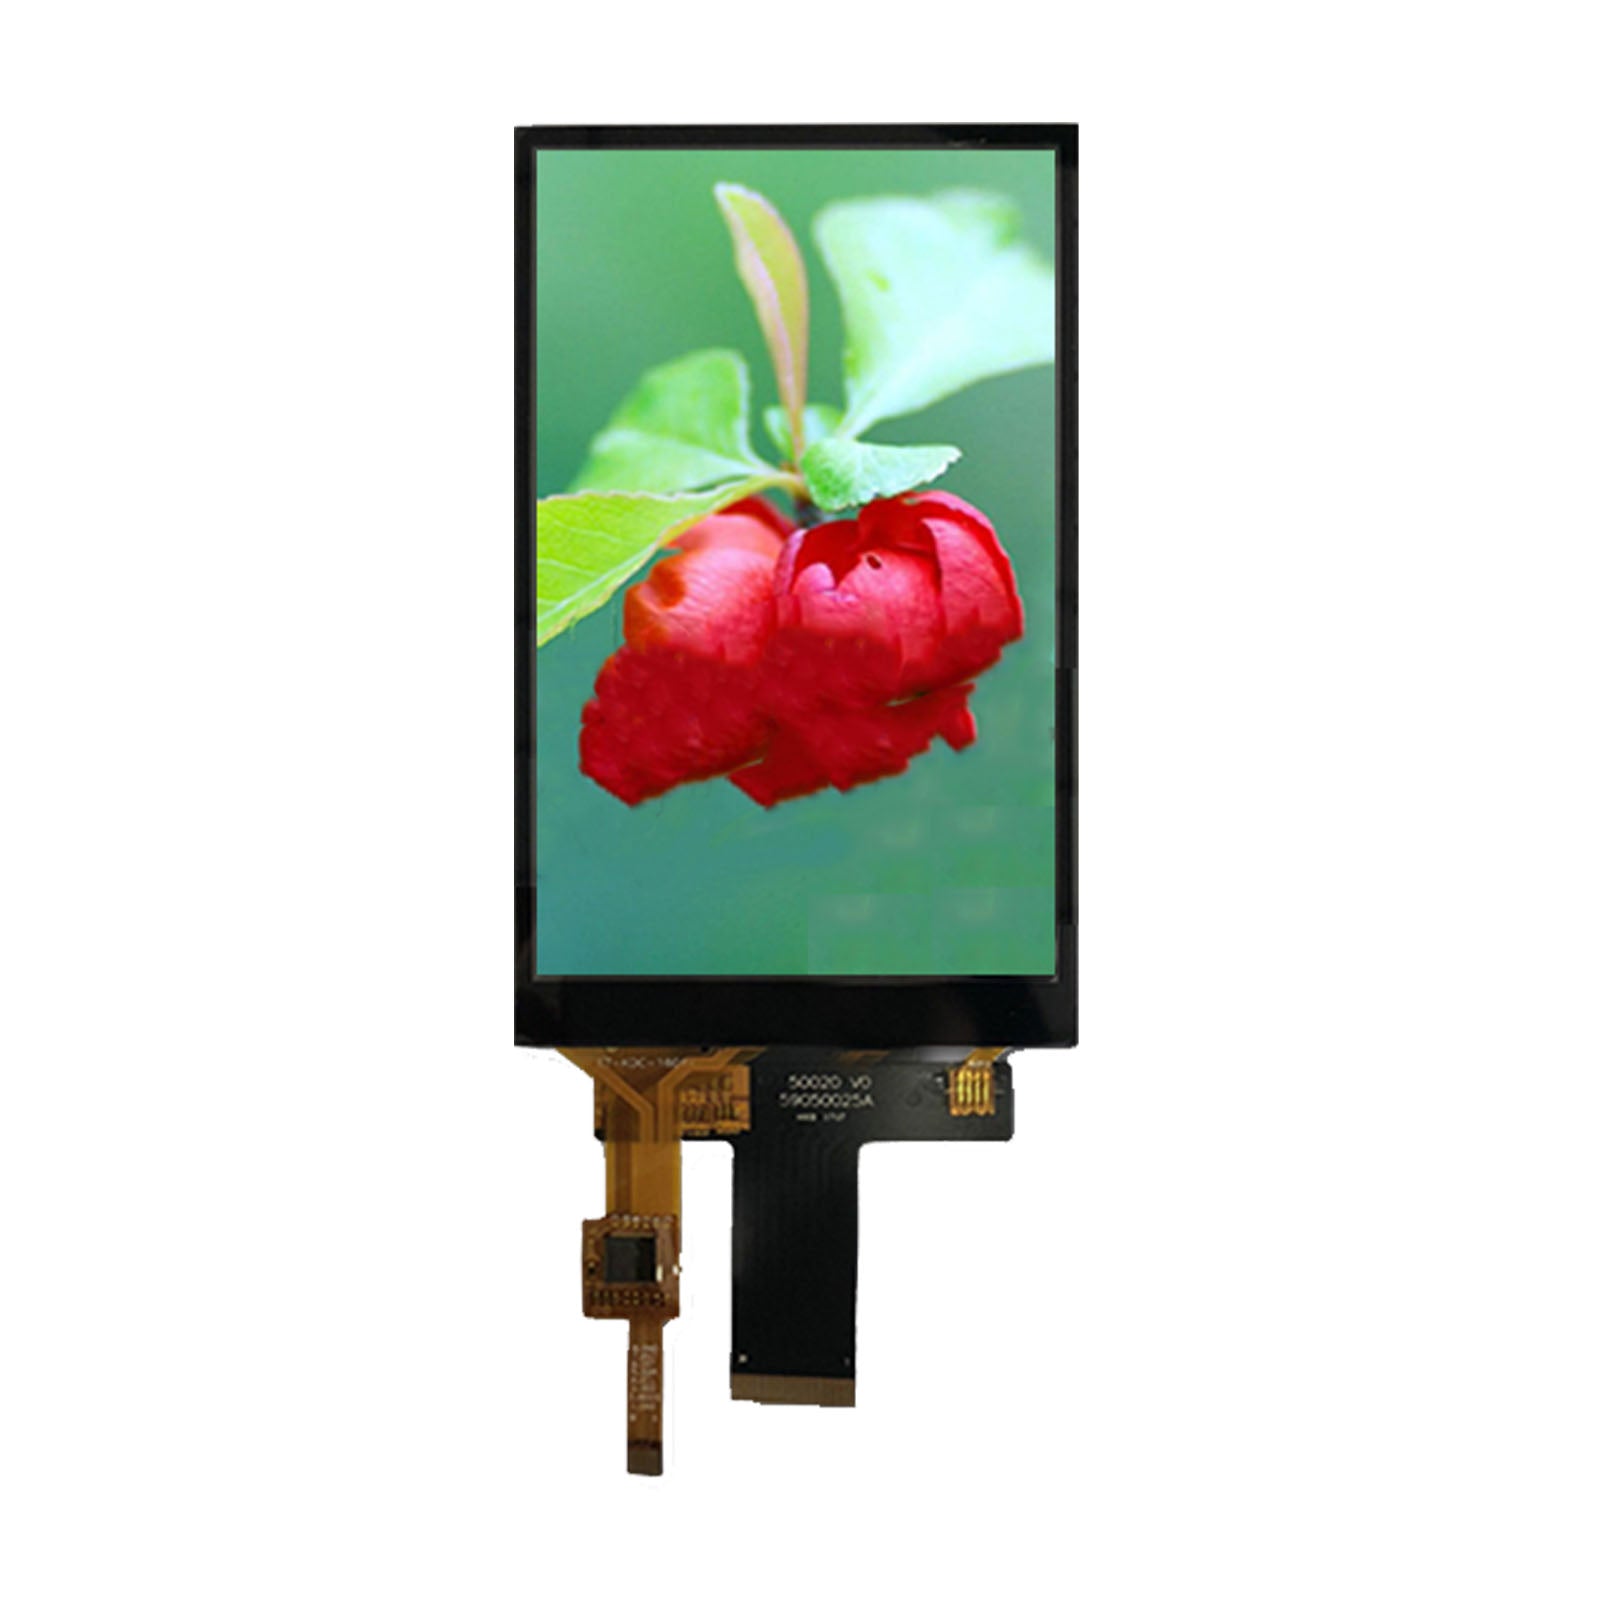 DisplayModule 5" IPS 720x1280 FULL VIEW DISPLAY PANEL WITH CAPACITIVE TOUCH - MIPI